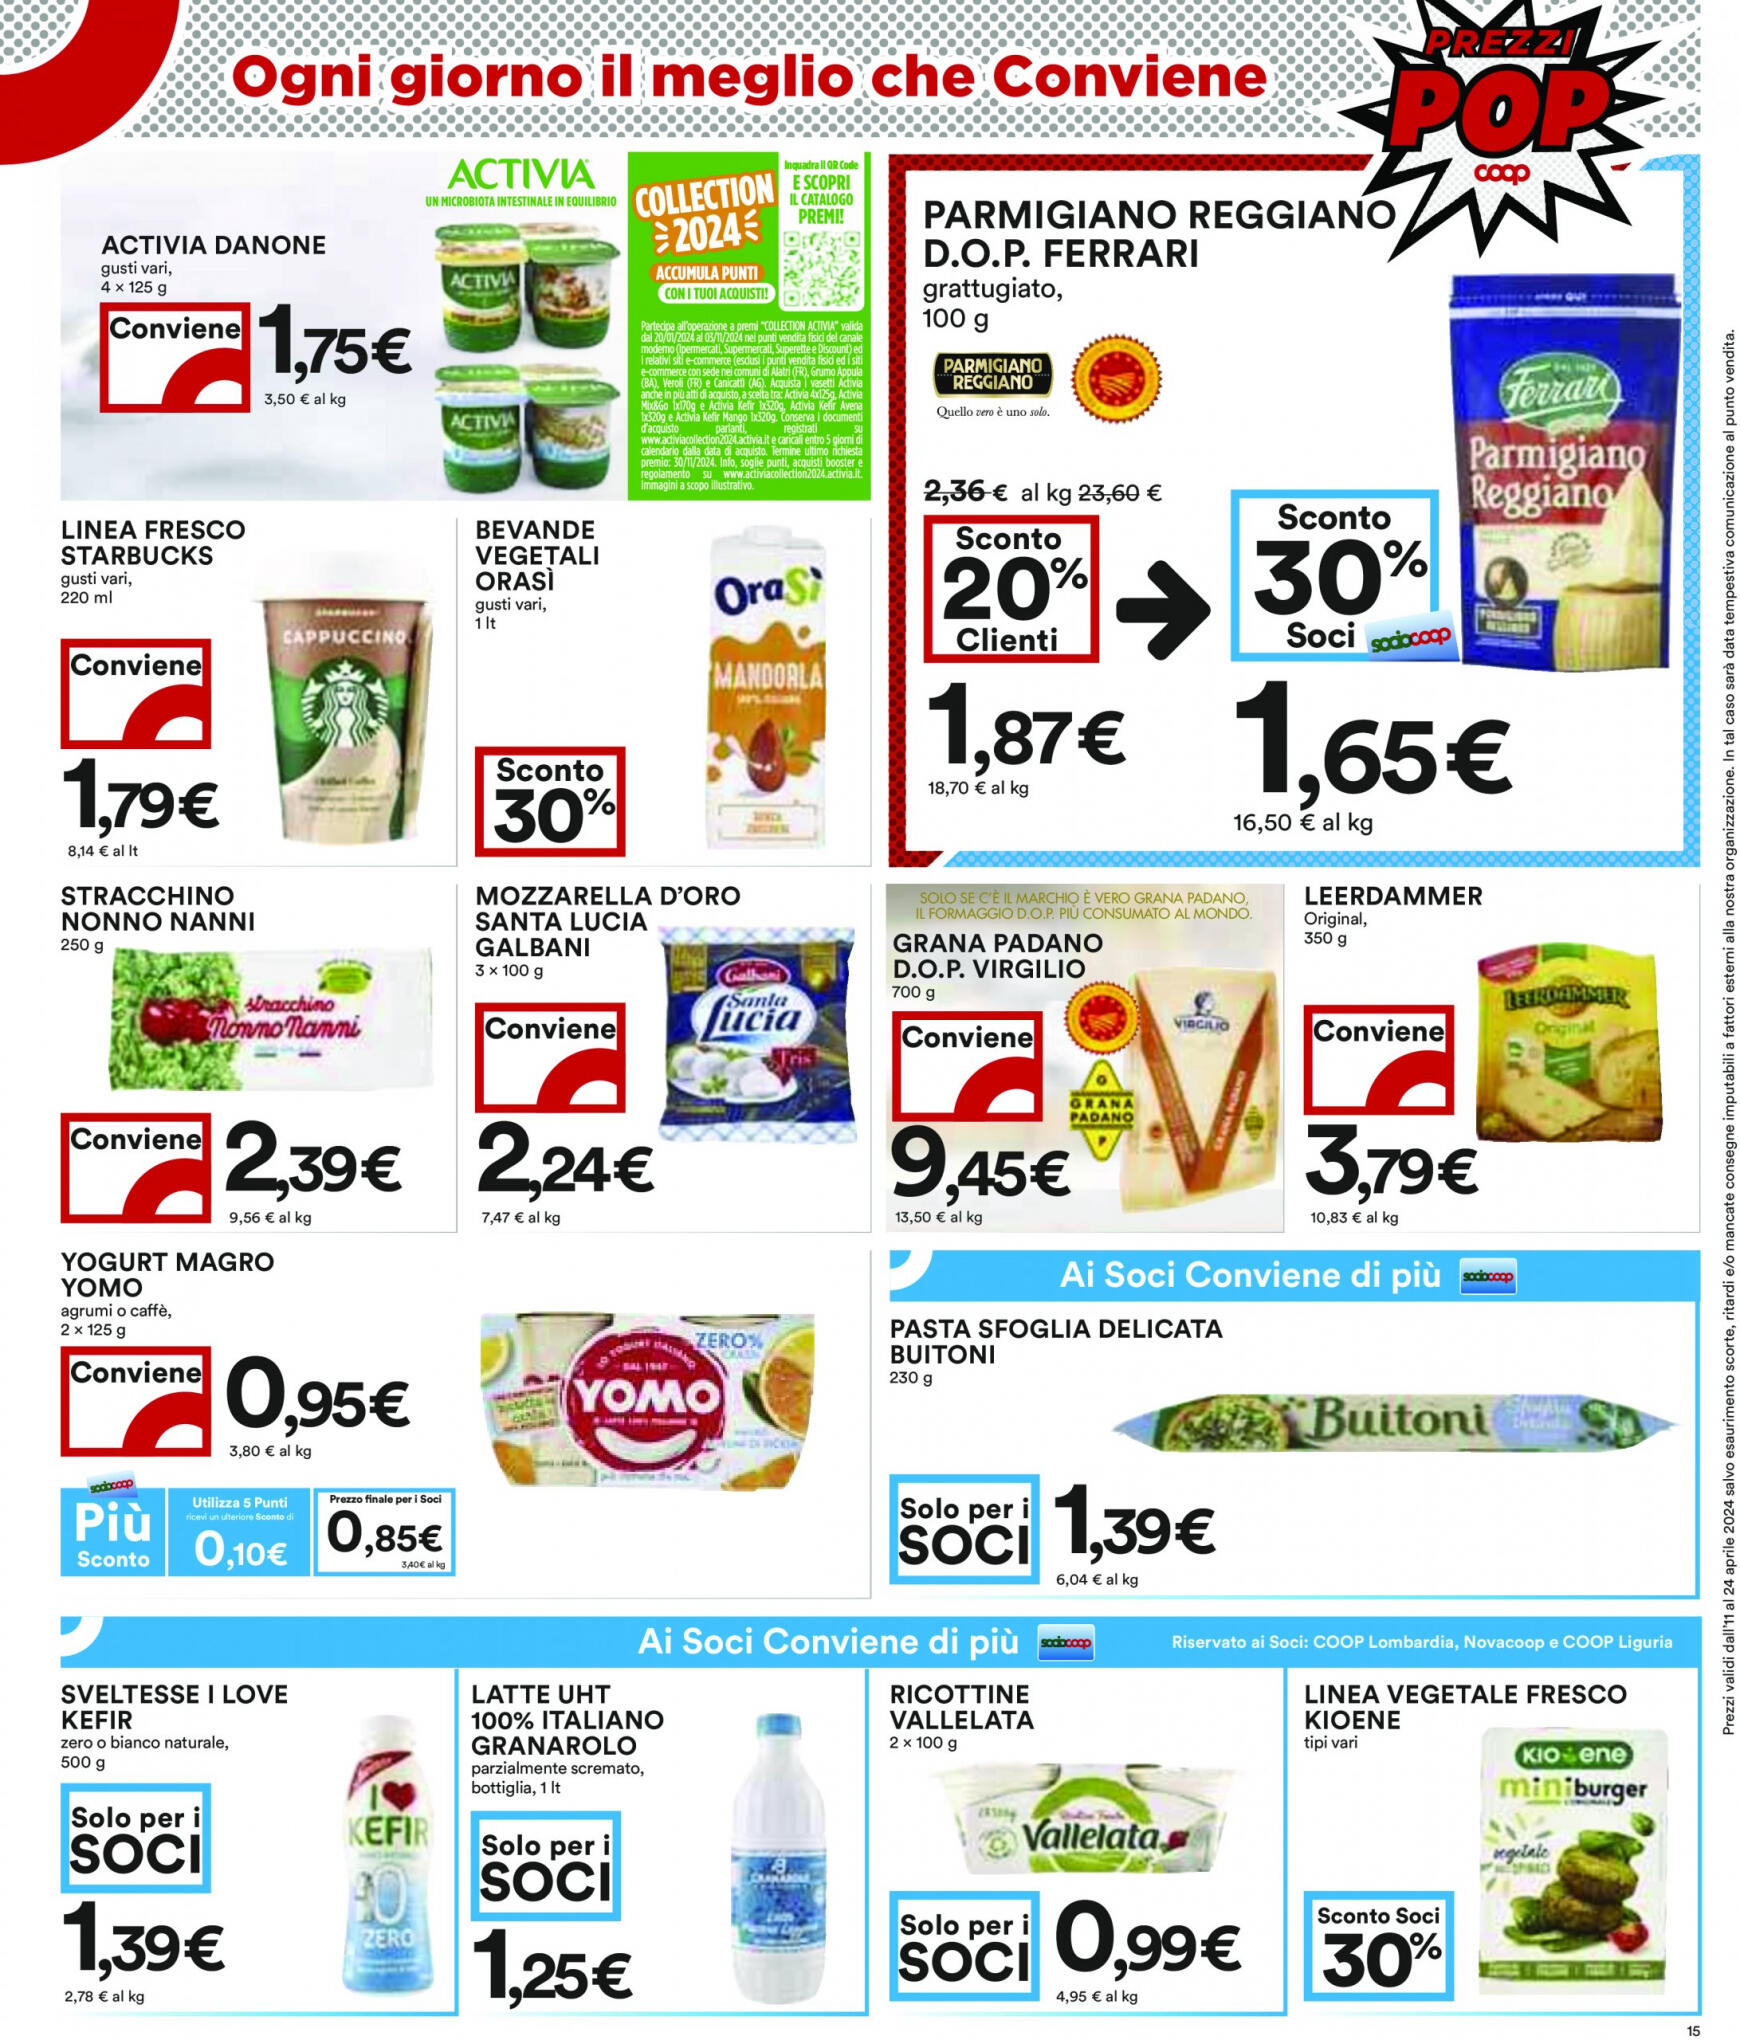 coop - Nuovo volantino Coop 11.04. - 24.04. - page: 15